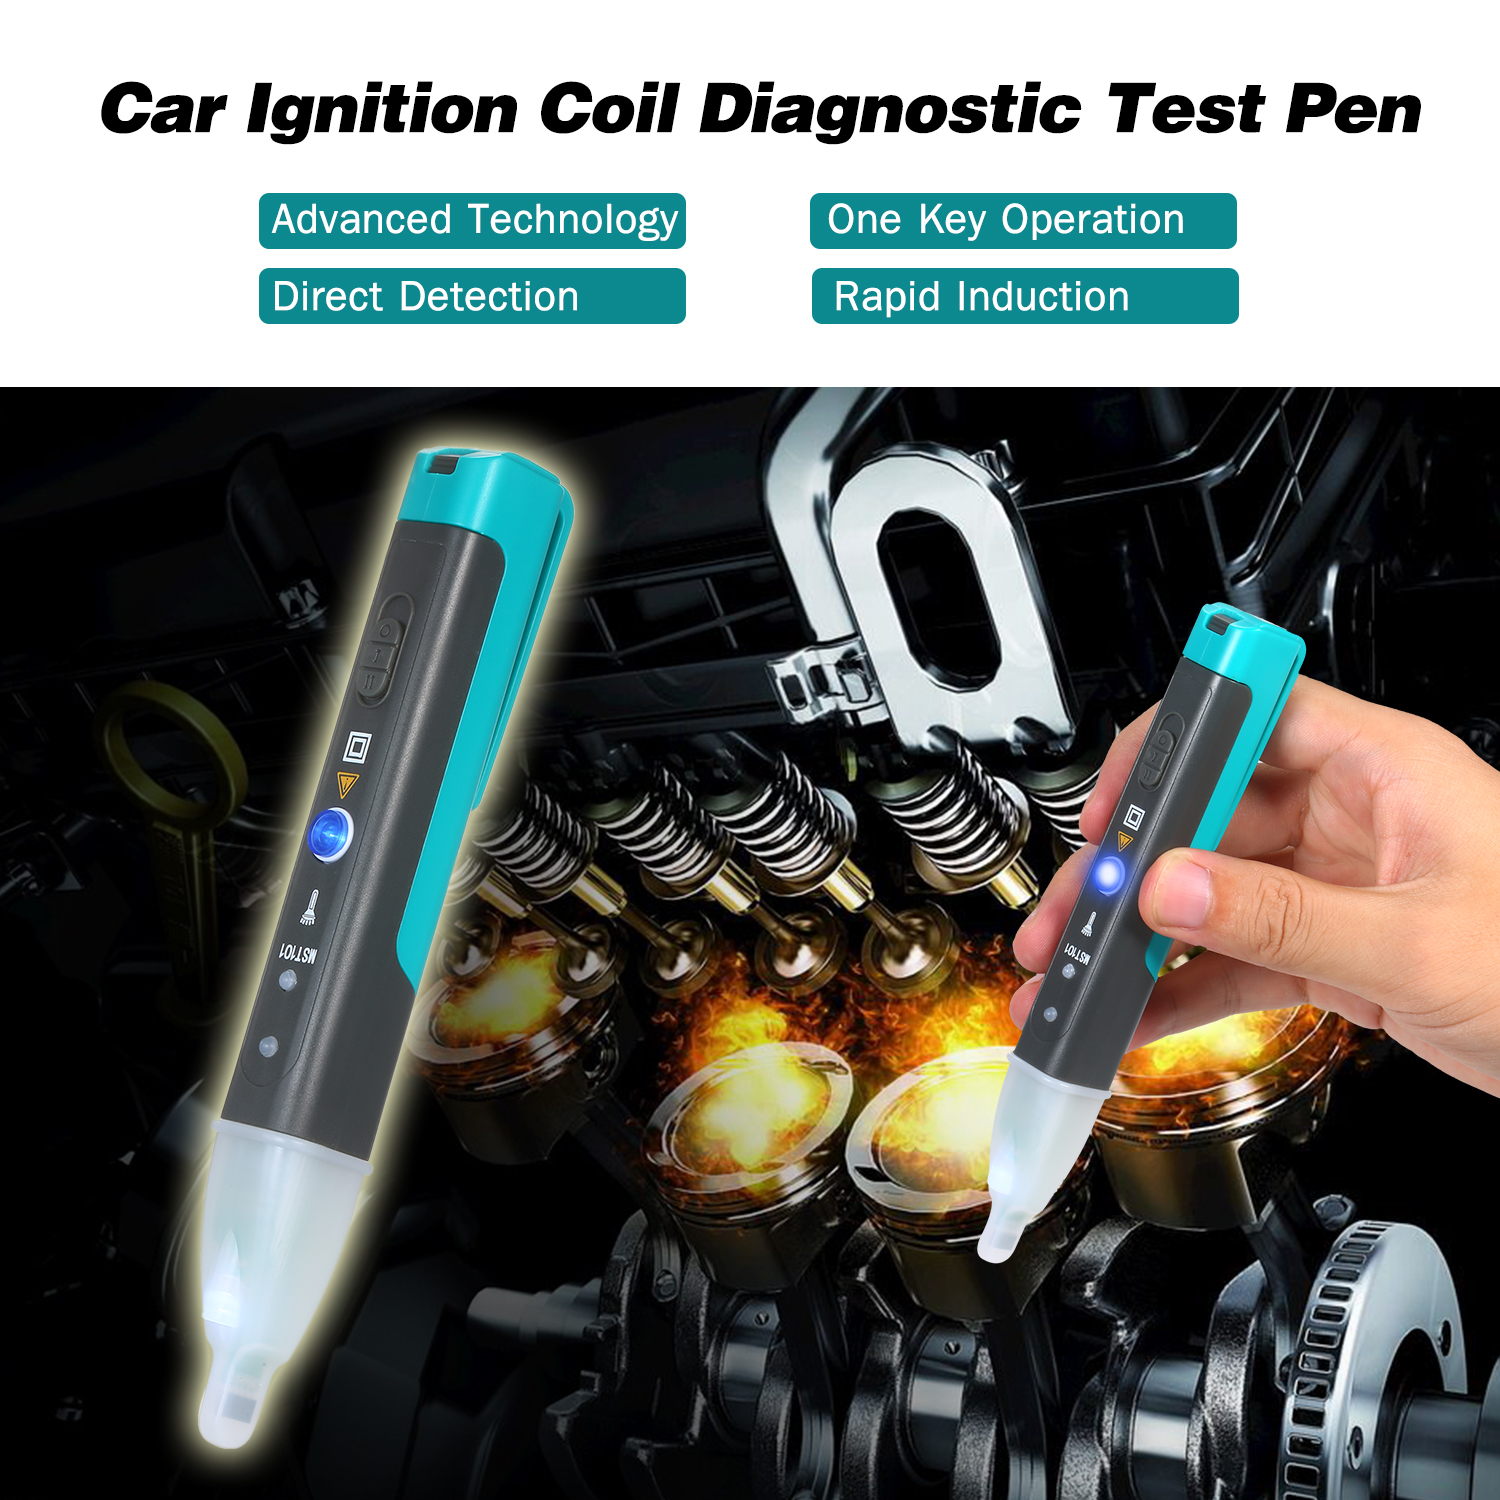 Automotive Non-dismantle Electronic Faults Detector Automotive Electric-Magnetic Indicator Ignition Tester Car Ignition Coil Diagnostic Tester Car Fault Detector - image 2 of 7